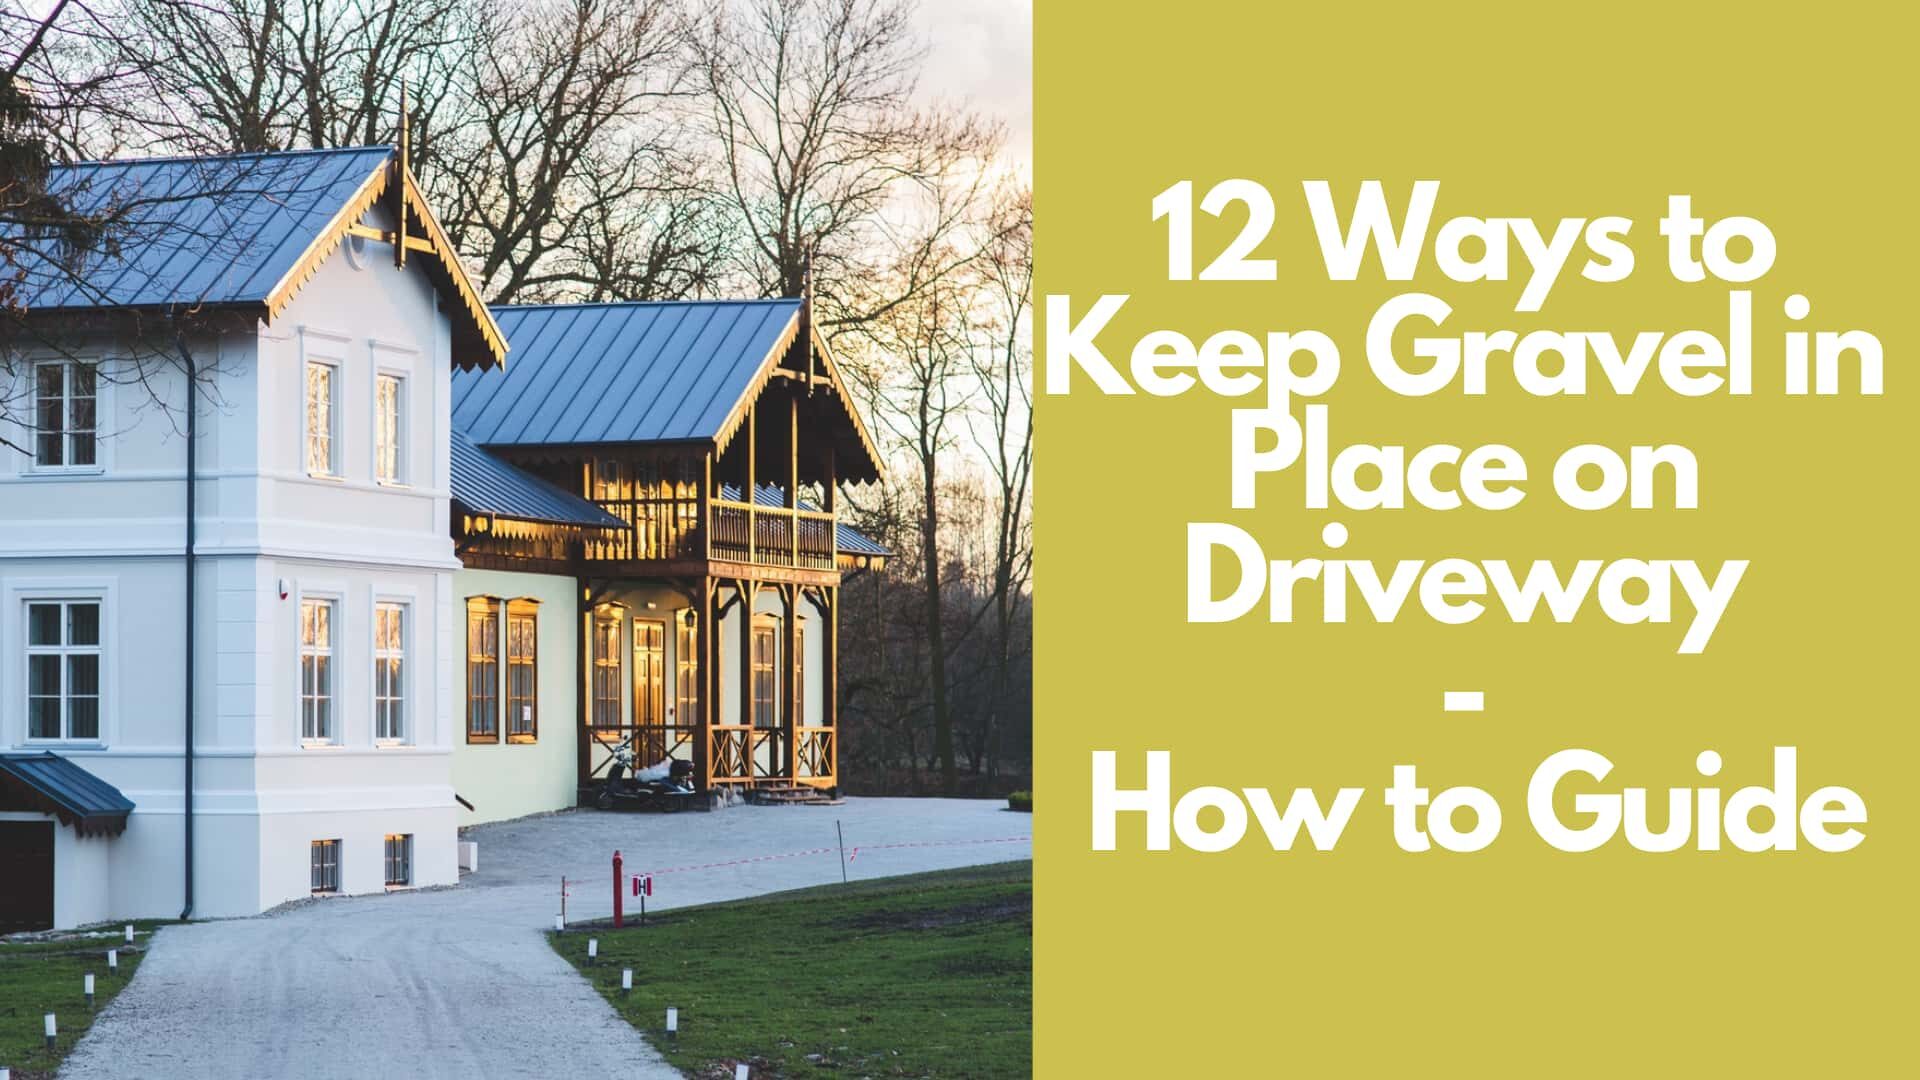 12 Ways to Keep Gravel in Place on Driveway: How to Guide